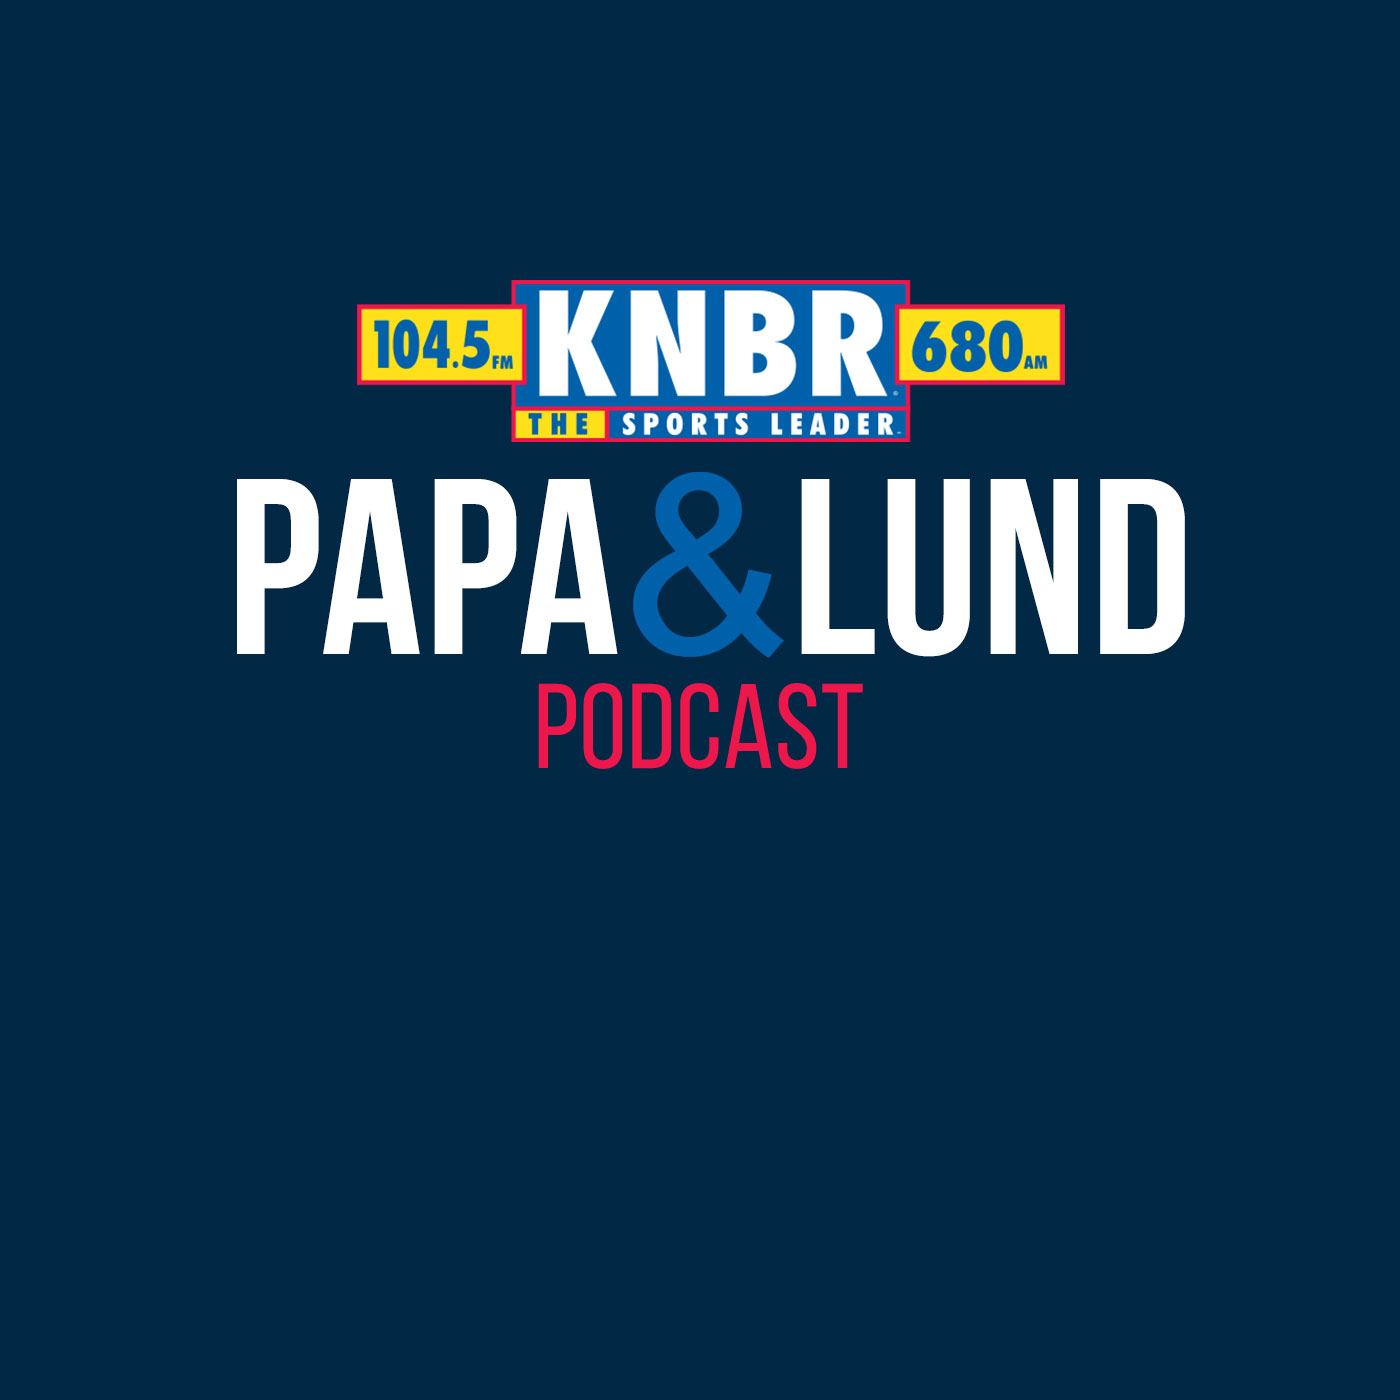 12-13 Tim Legler joined Papa & Lund to discuss Draymond Green's ejection and how this time it is really difficult to defend his antics